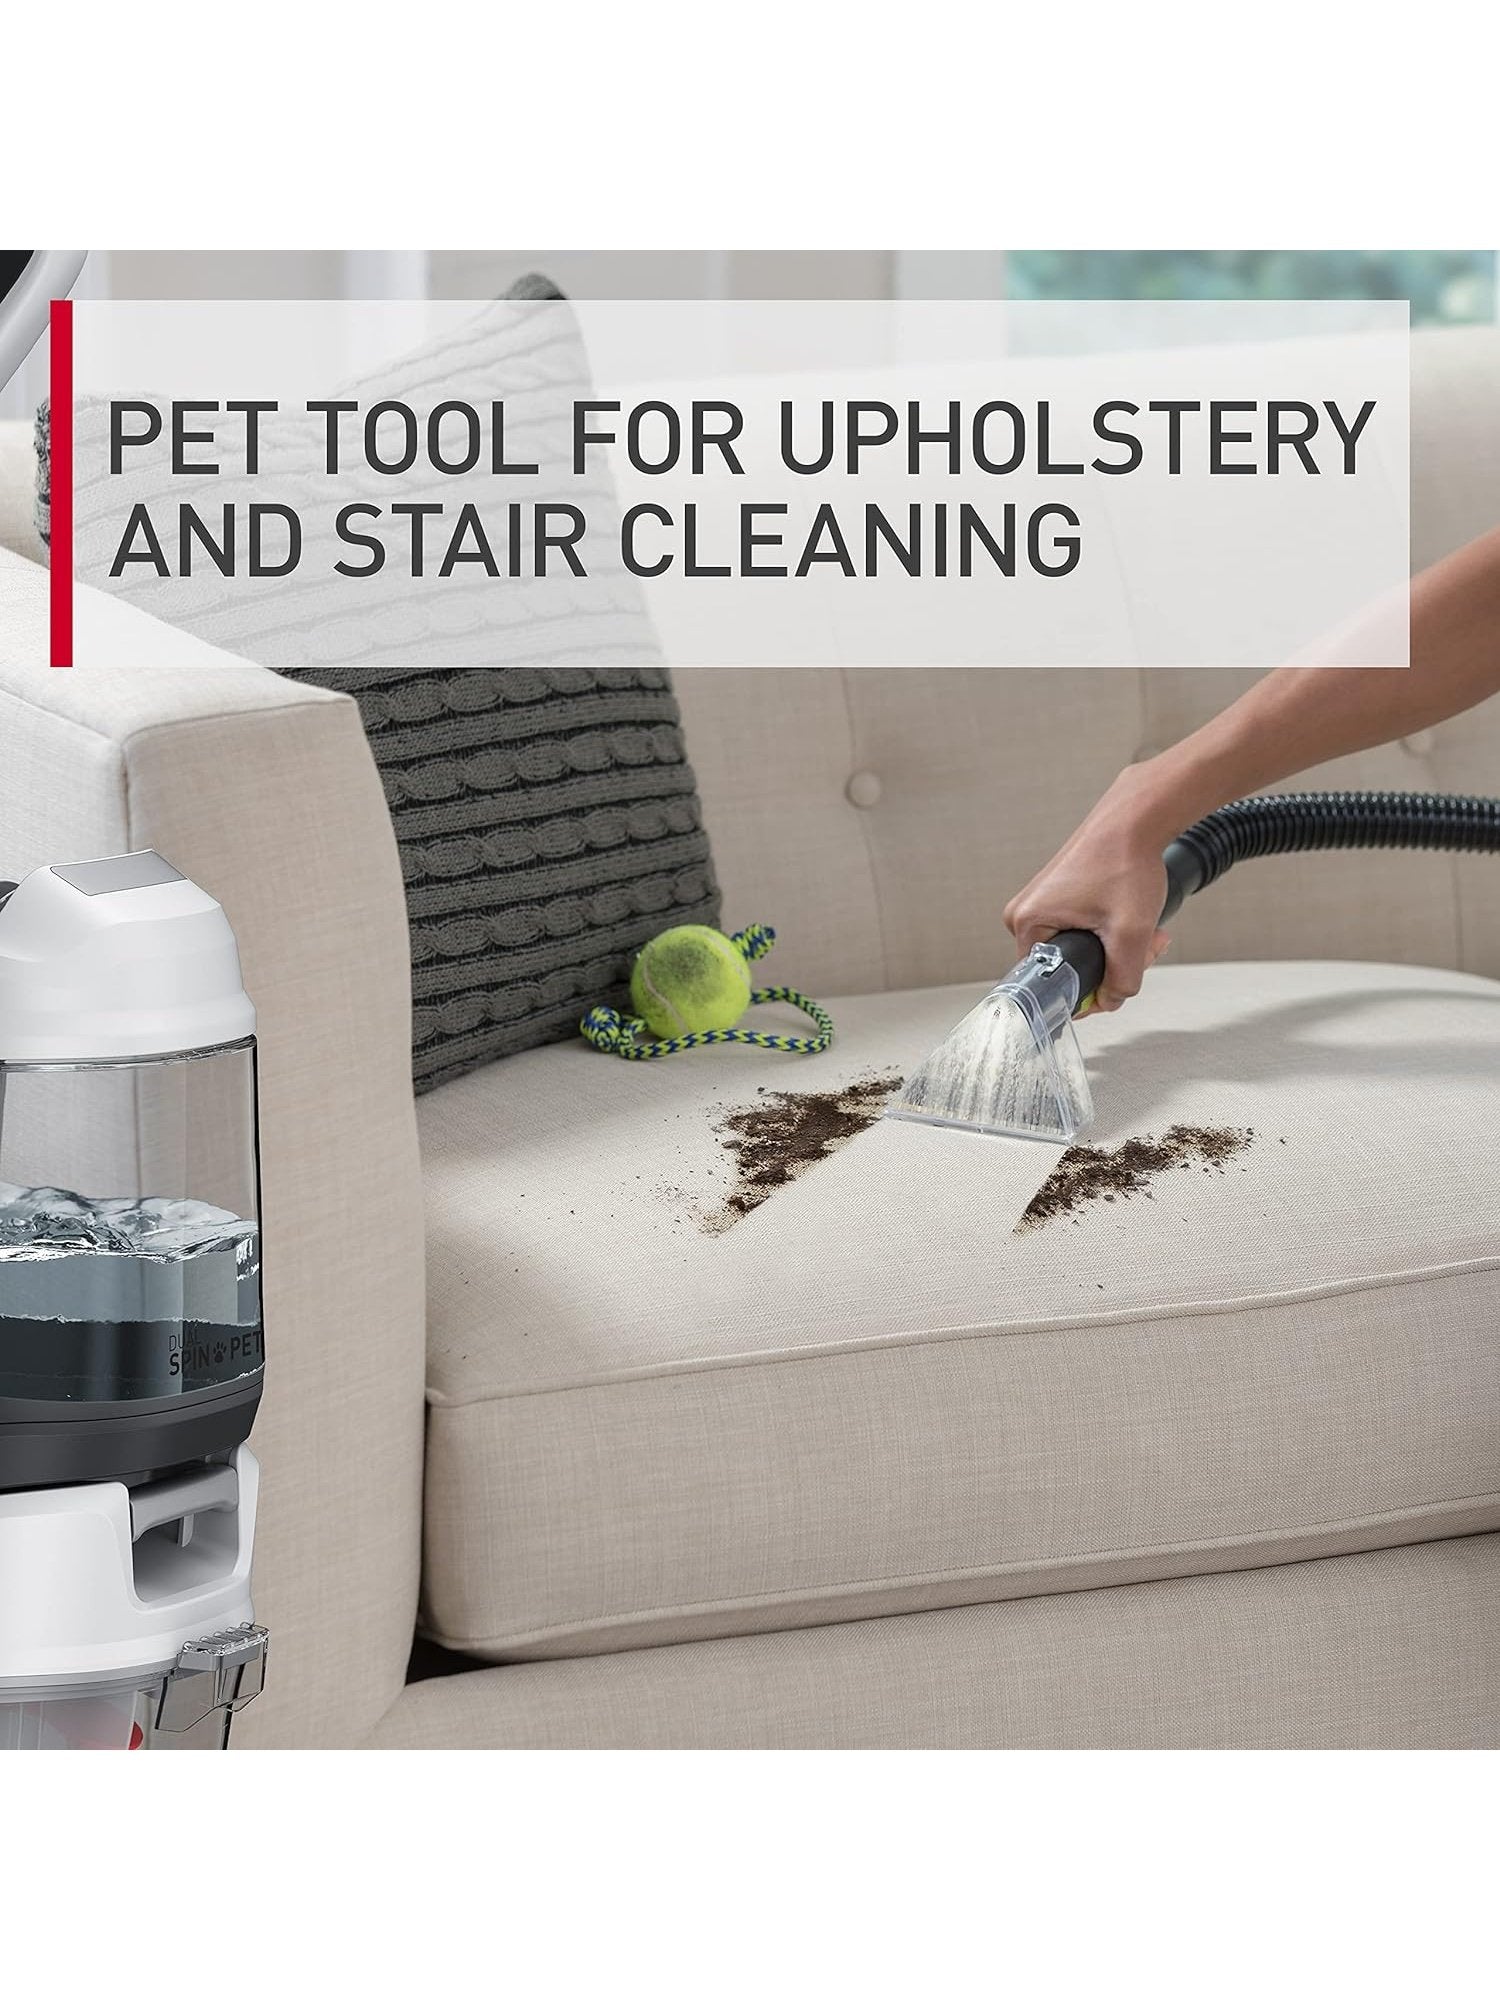 Hoover Dual Spin Pet Plus Carpet Cleaner Machine with Storage Mat, Upright Shampooer, Carpet Deodorizer and Pet Stain Remover, FH54050V, White